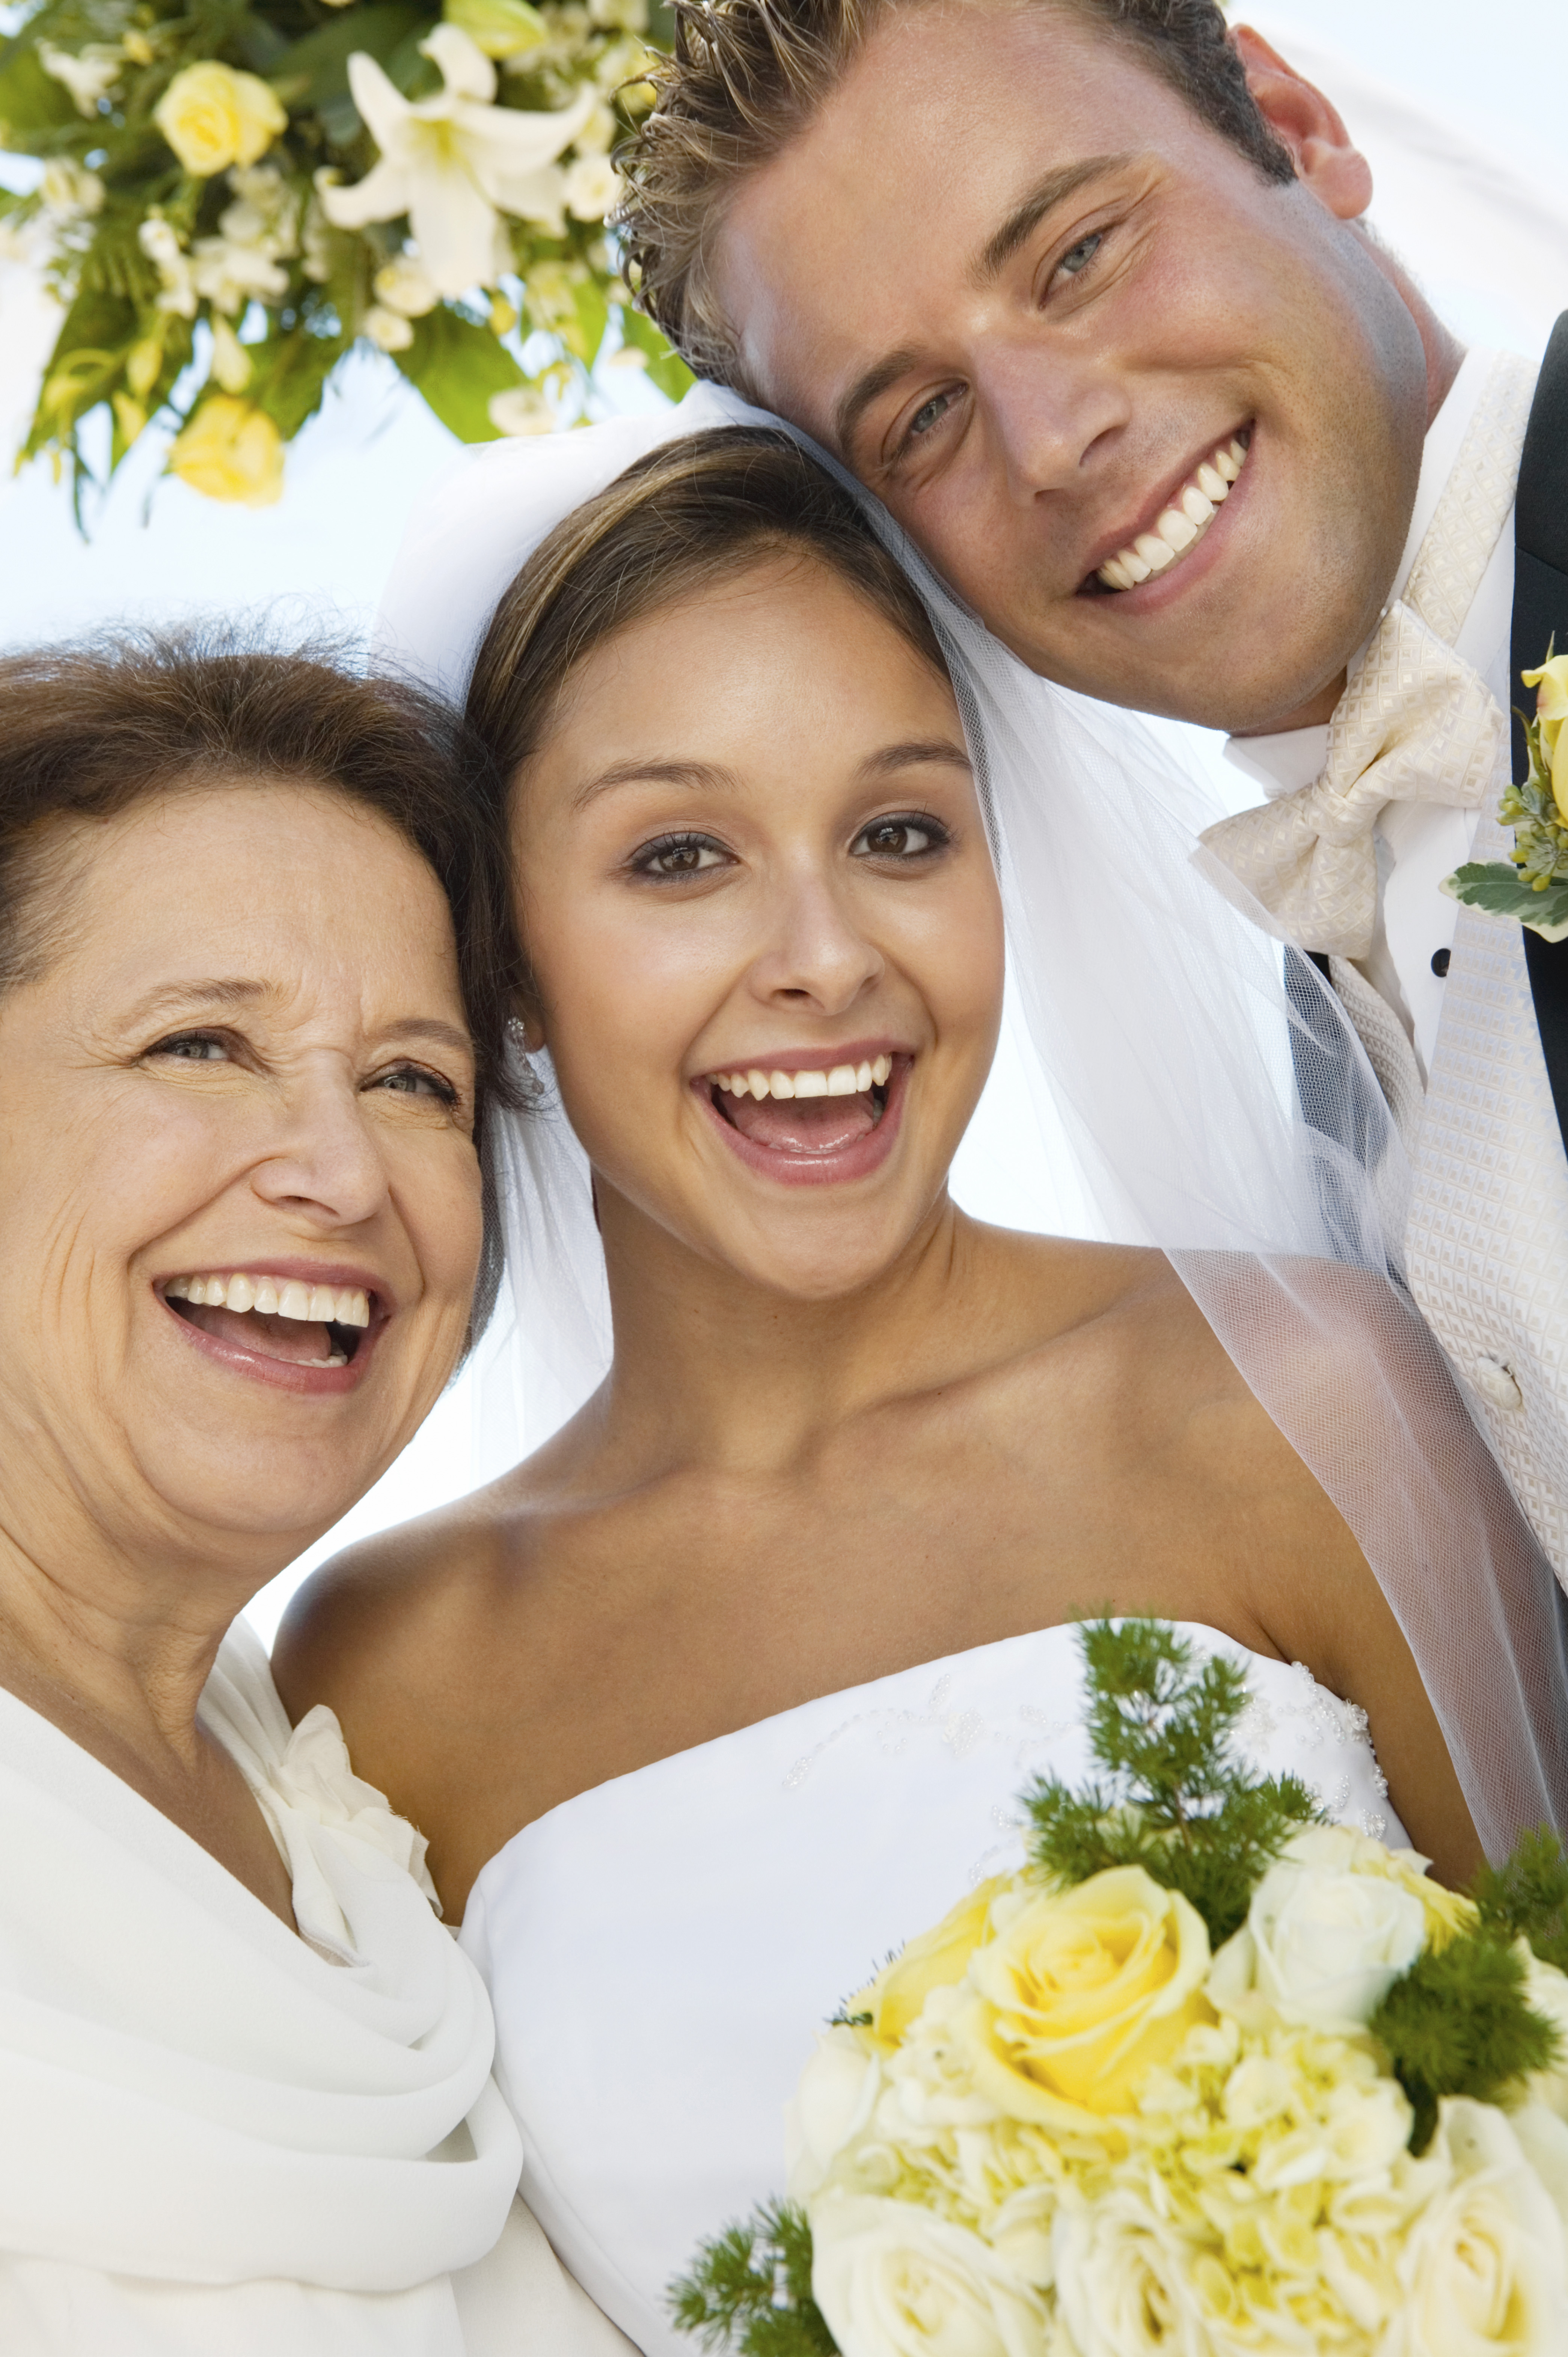 A bride and groom with their mom on their wedding day | Source: Shutterstock